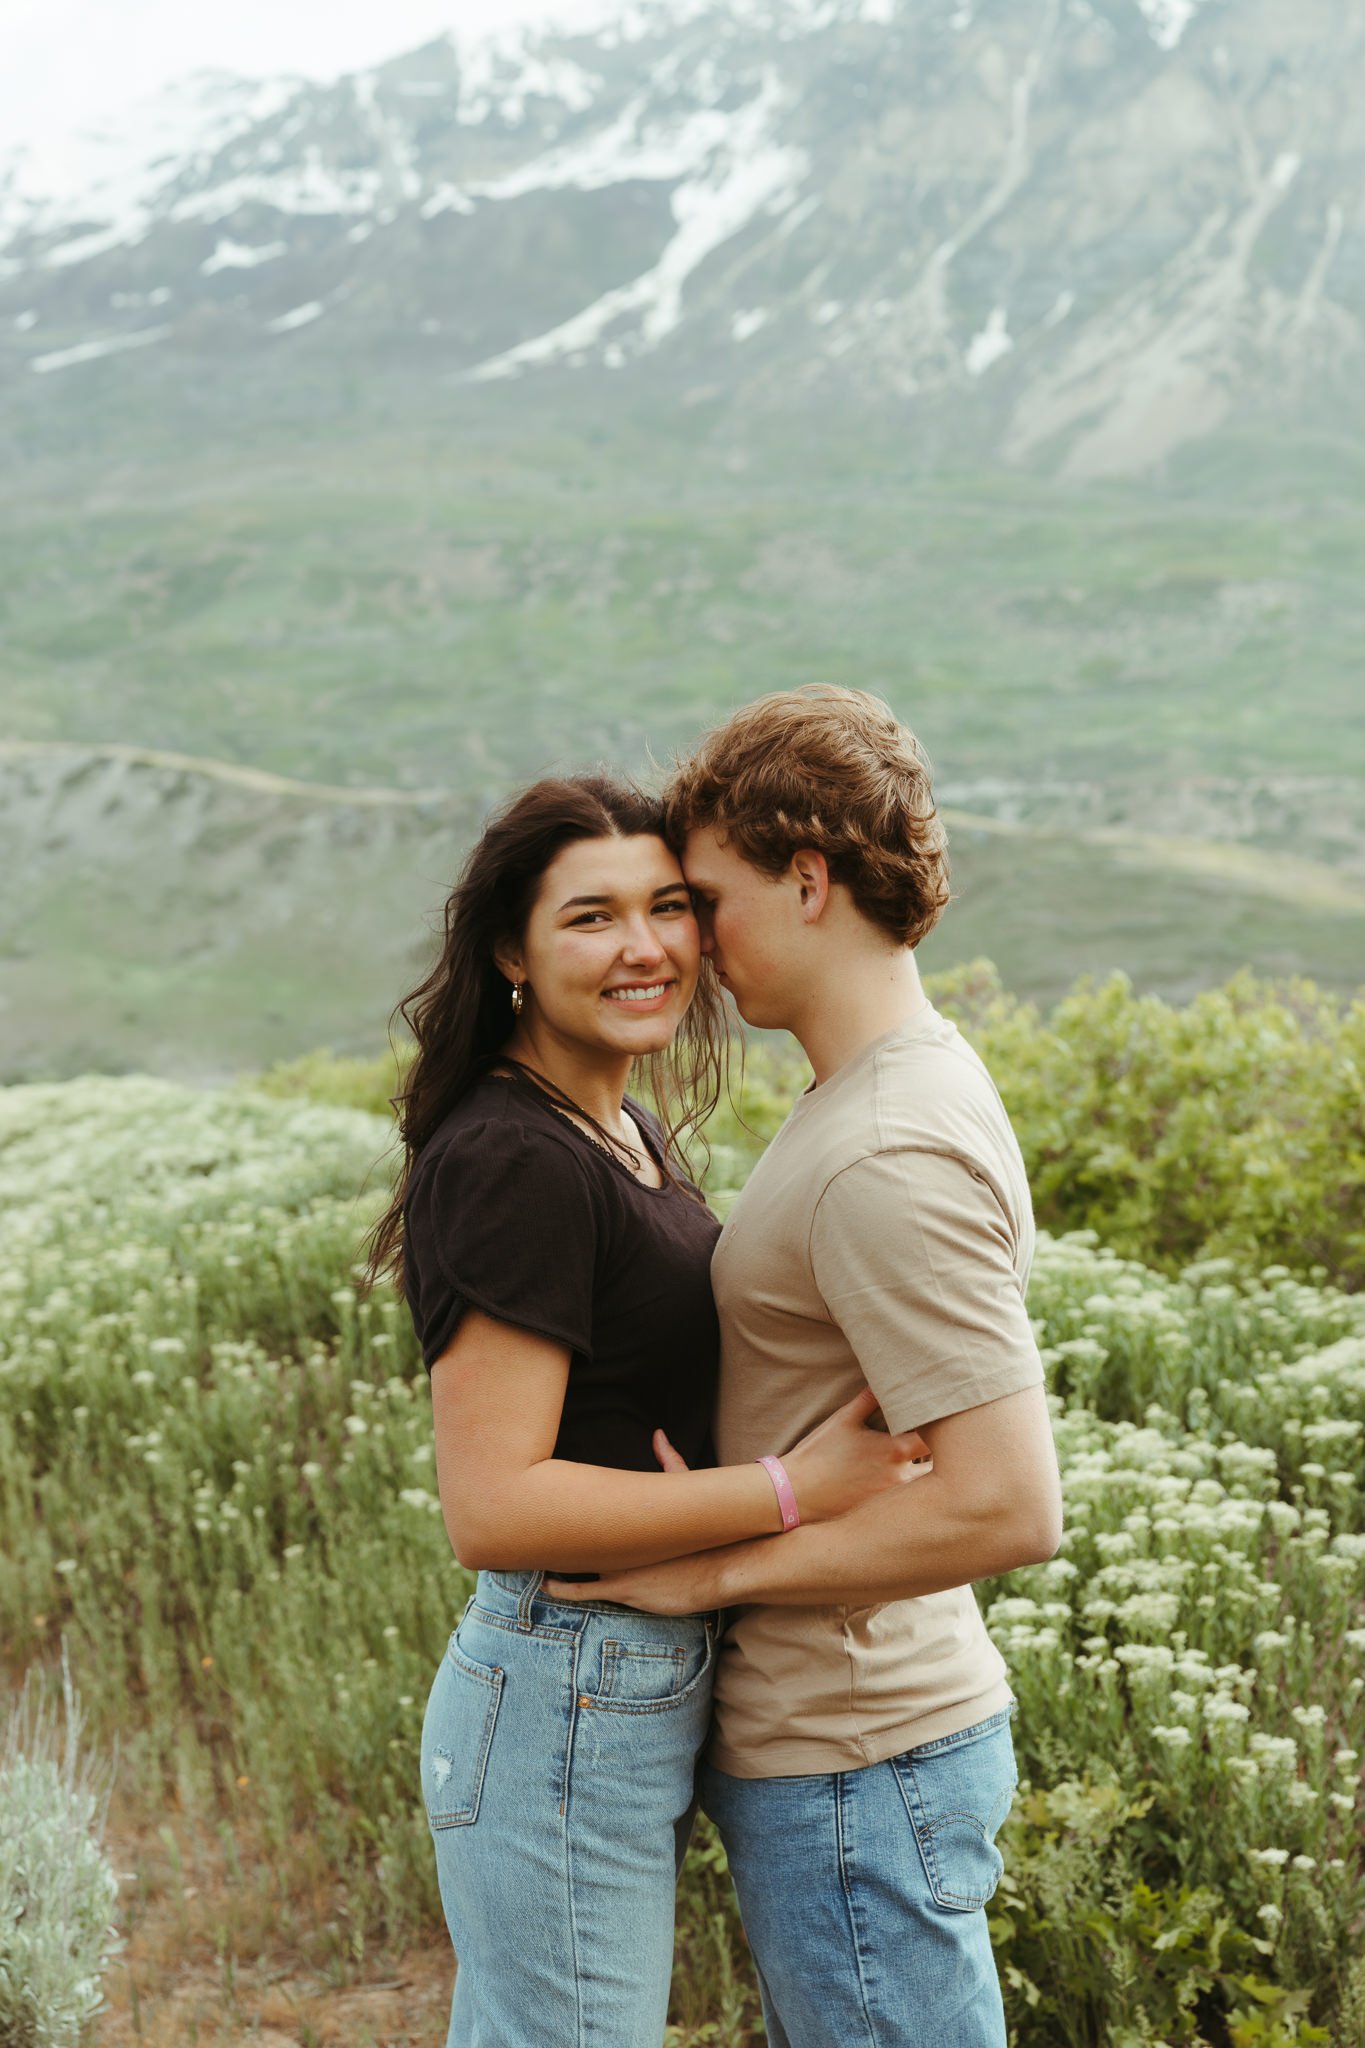 Spring-Provo-Canyon-Wildflowers-Engagement-Session-25